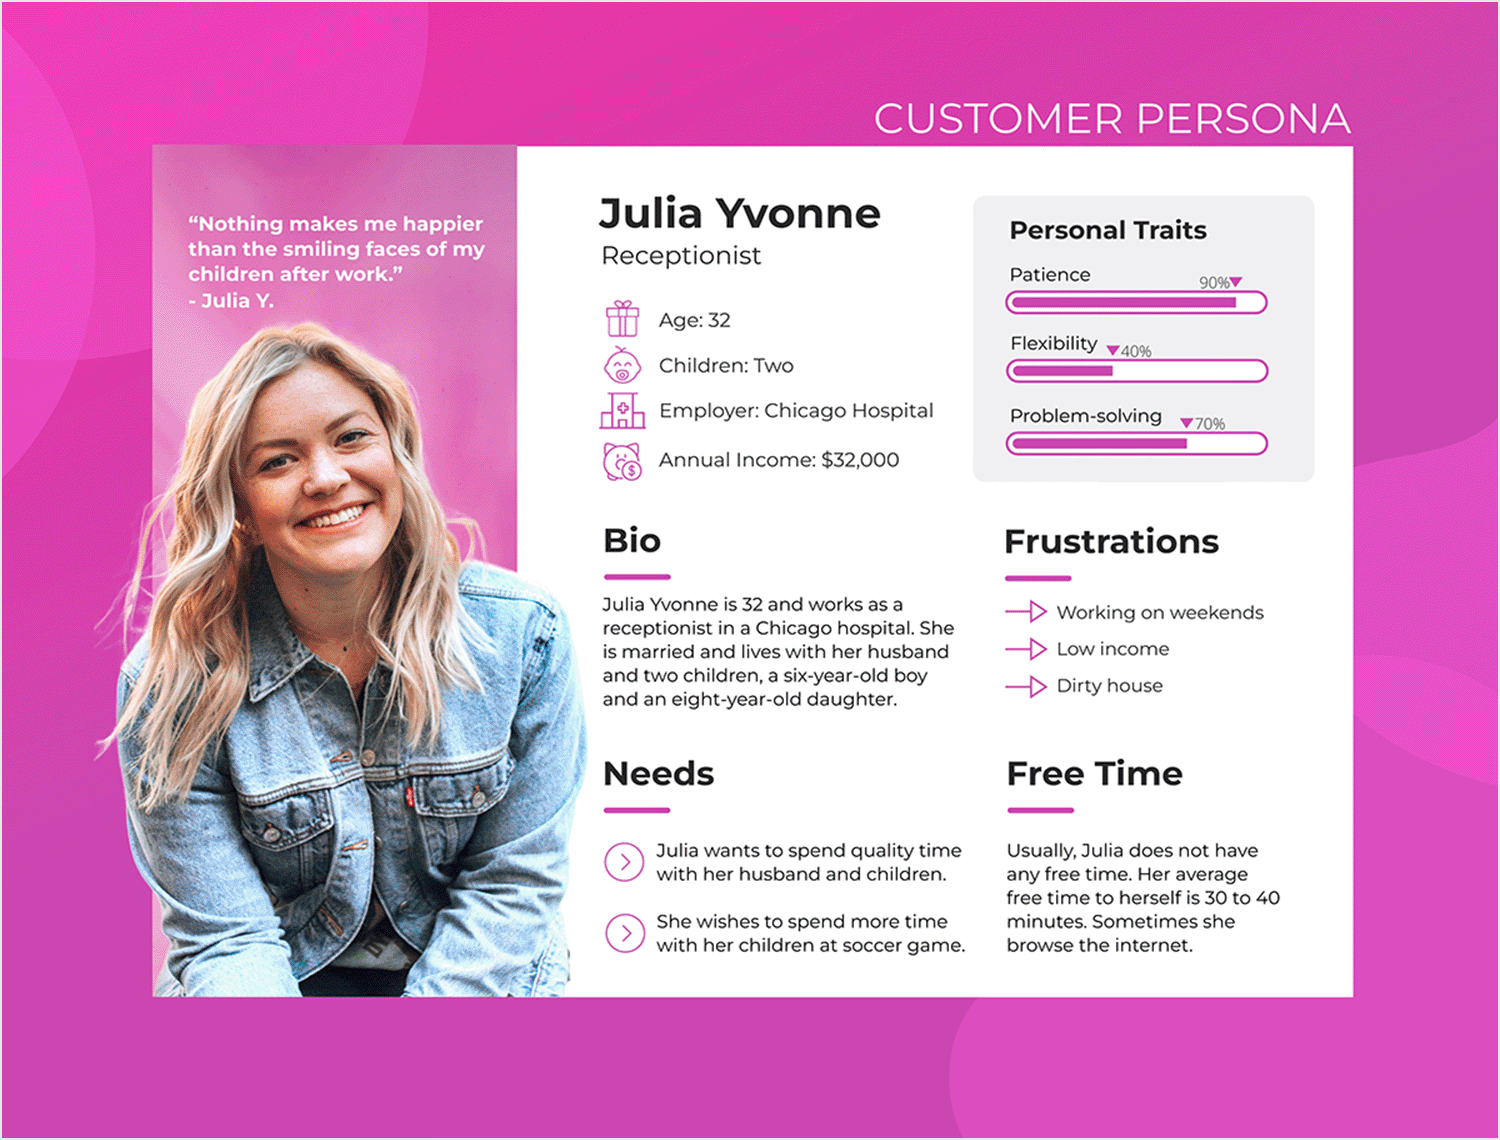 Colorful user persona template depicting Julia Yvonne's dreams, challenges, and aspirations, aiding business solutions.